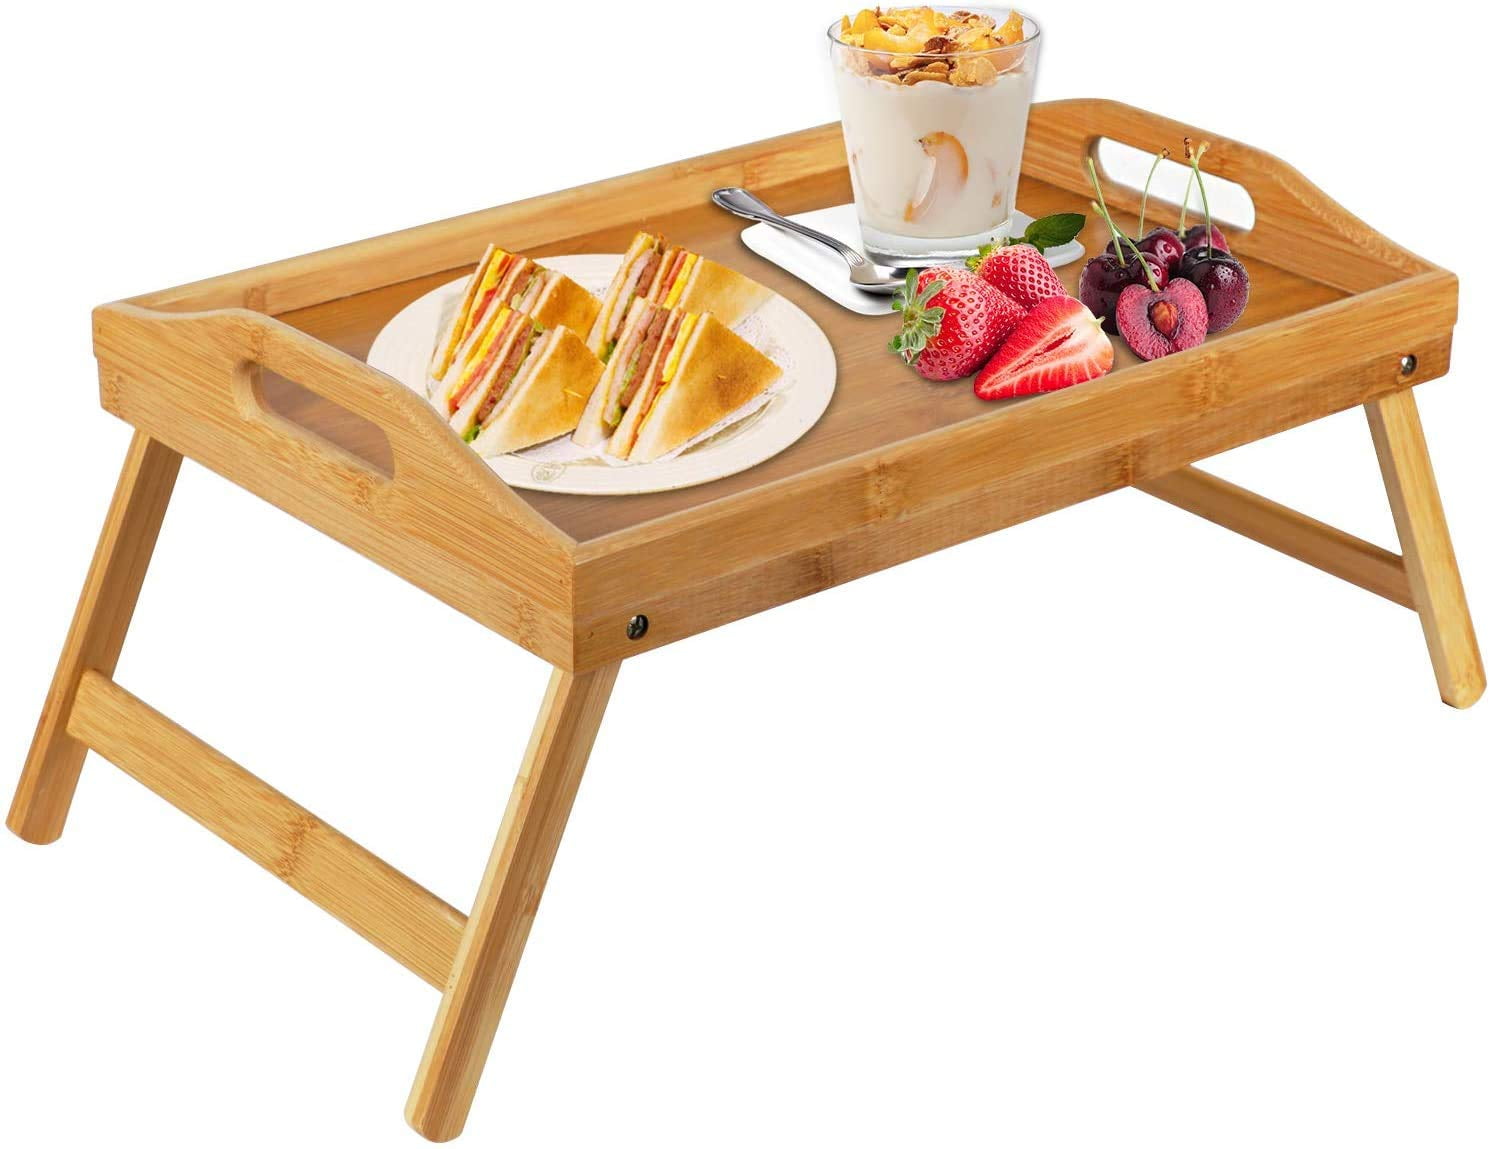 Snack Tray Sofa Curved Breakfast Tray with Handle and Foldable Legs for Bed Laptop Desk Bamboo Breakfast Serving Tray Bed Tray Table Eating Wood Color 